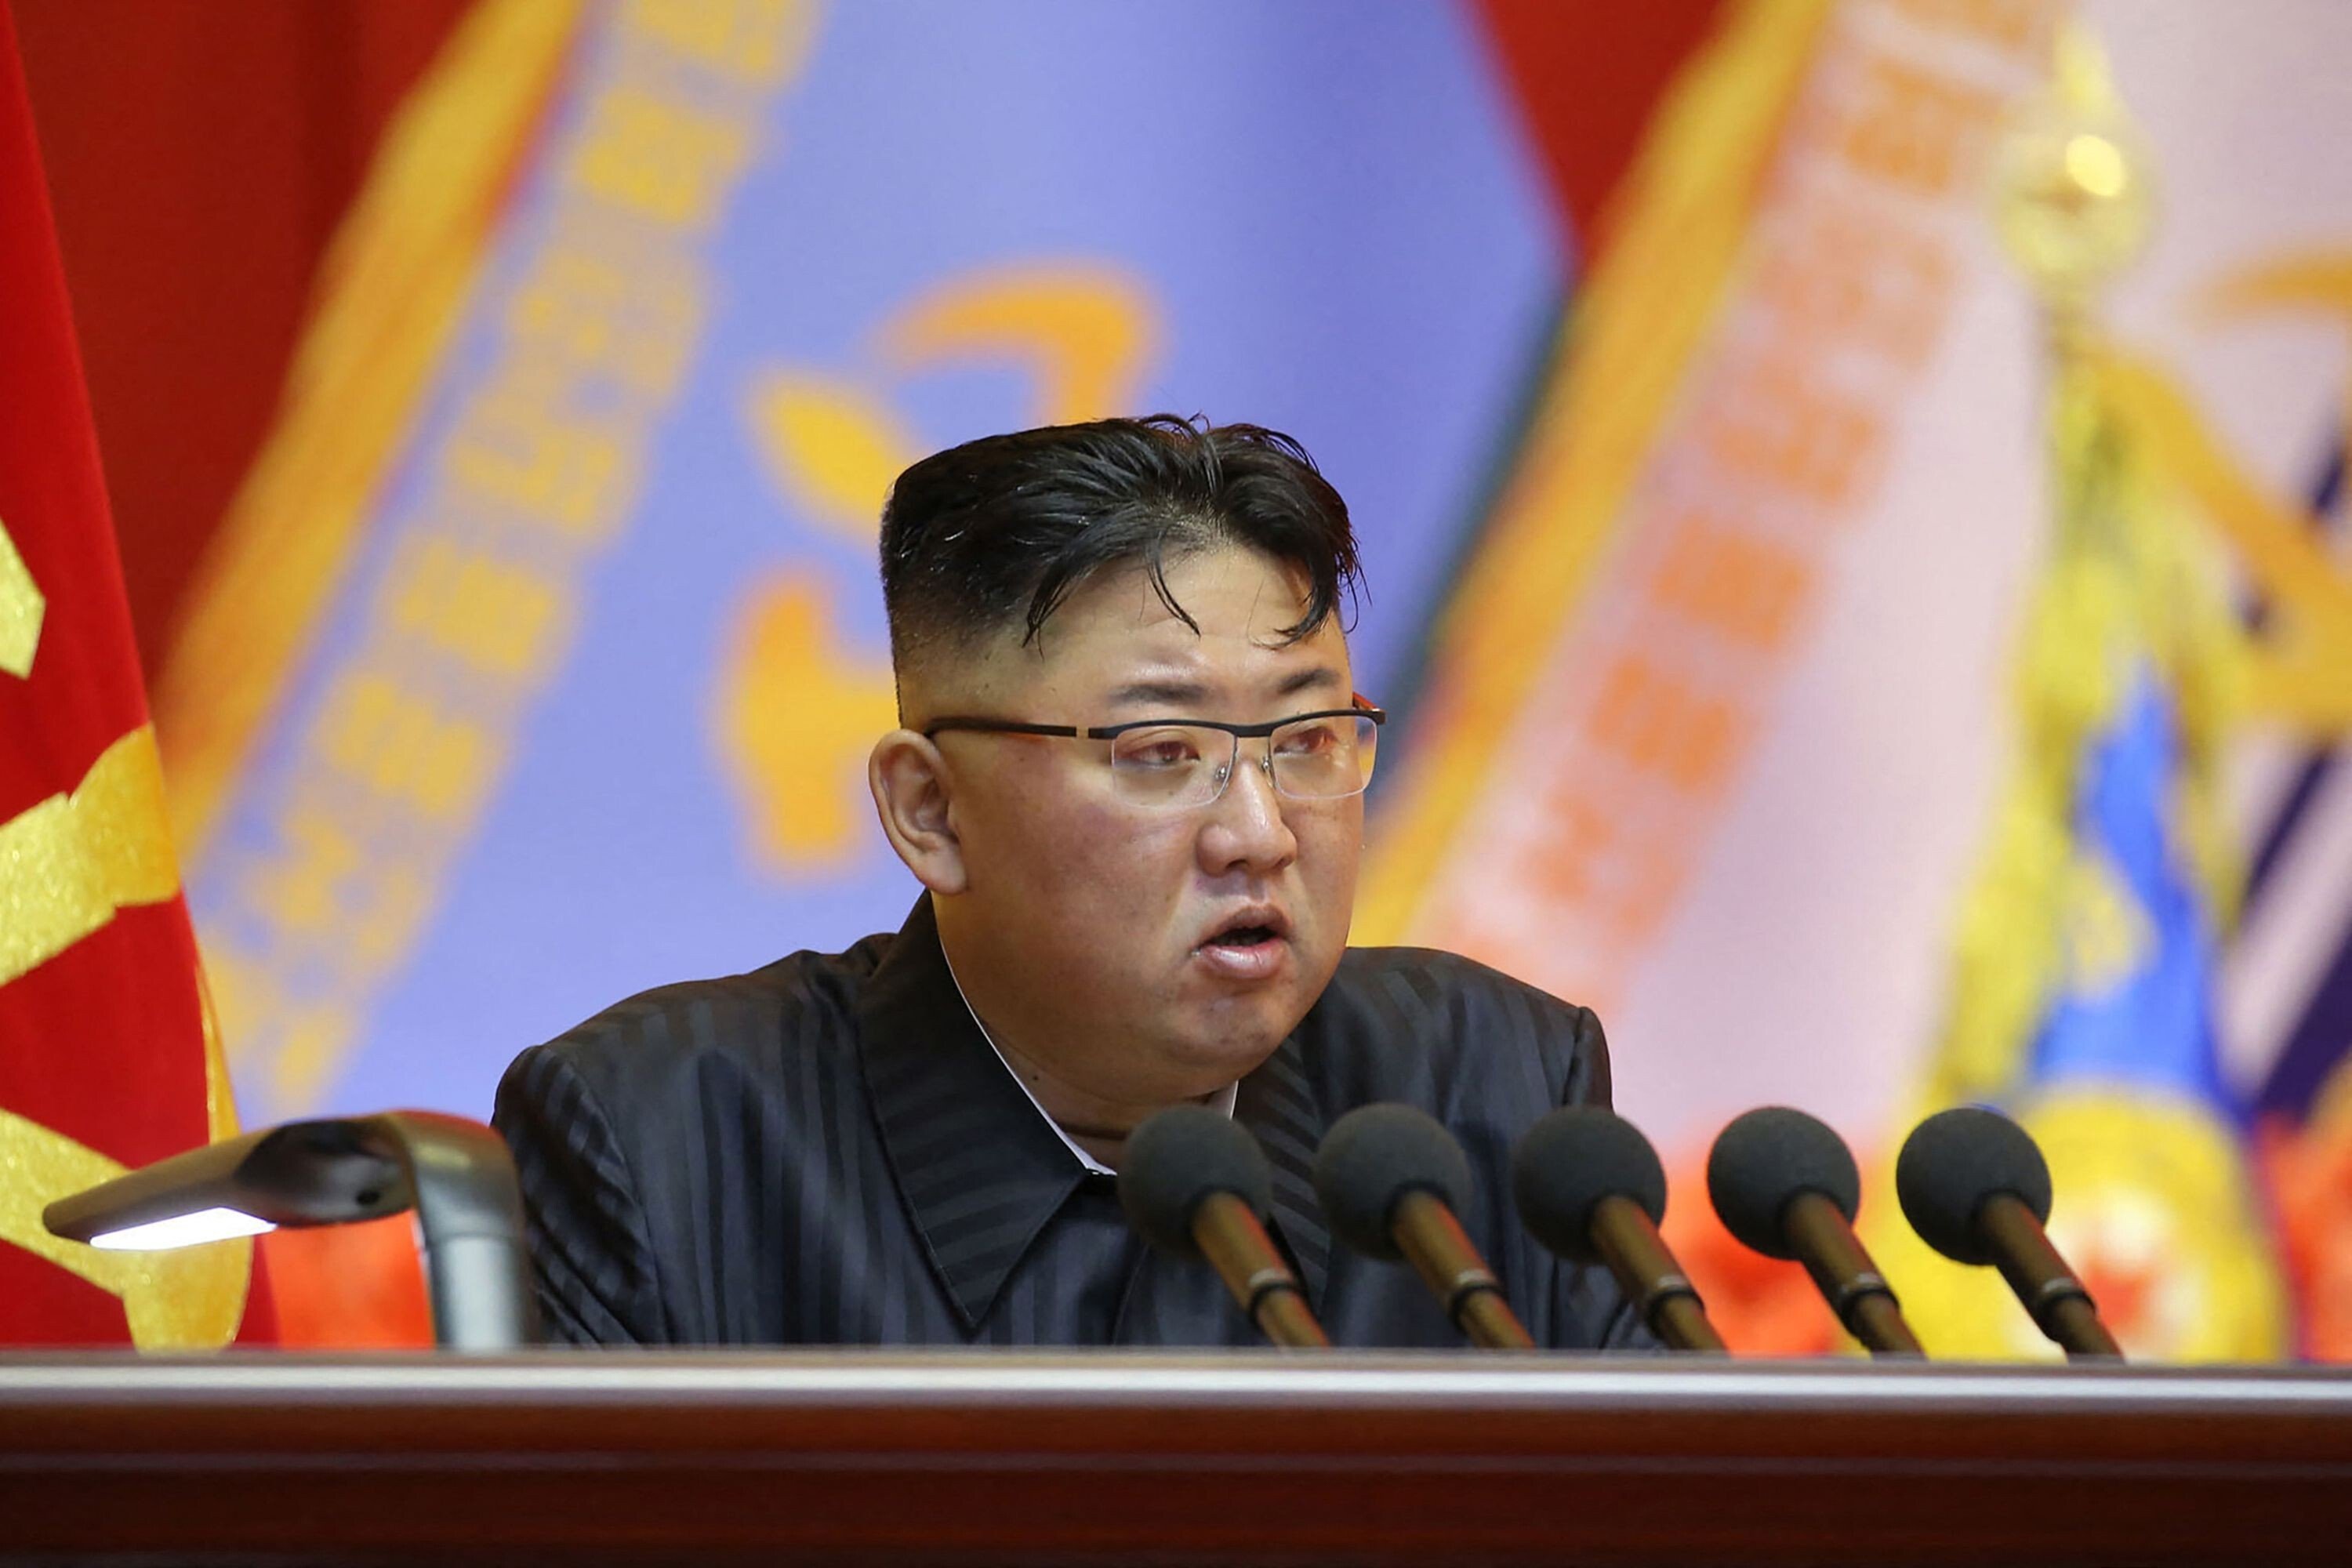 North Korean leader Kim Jong-un addresses a workshop in Pyongyang in an undated picture released by the official Korean Central News Agency on July 30. Photo: KCNA VIA KNS / AFP